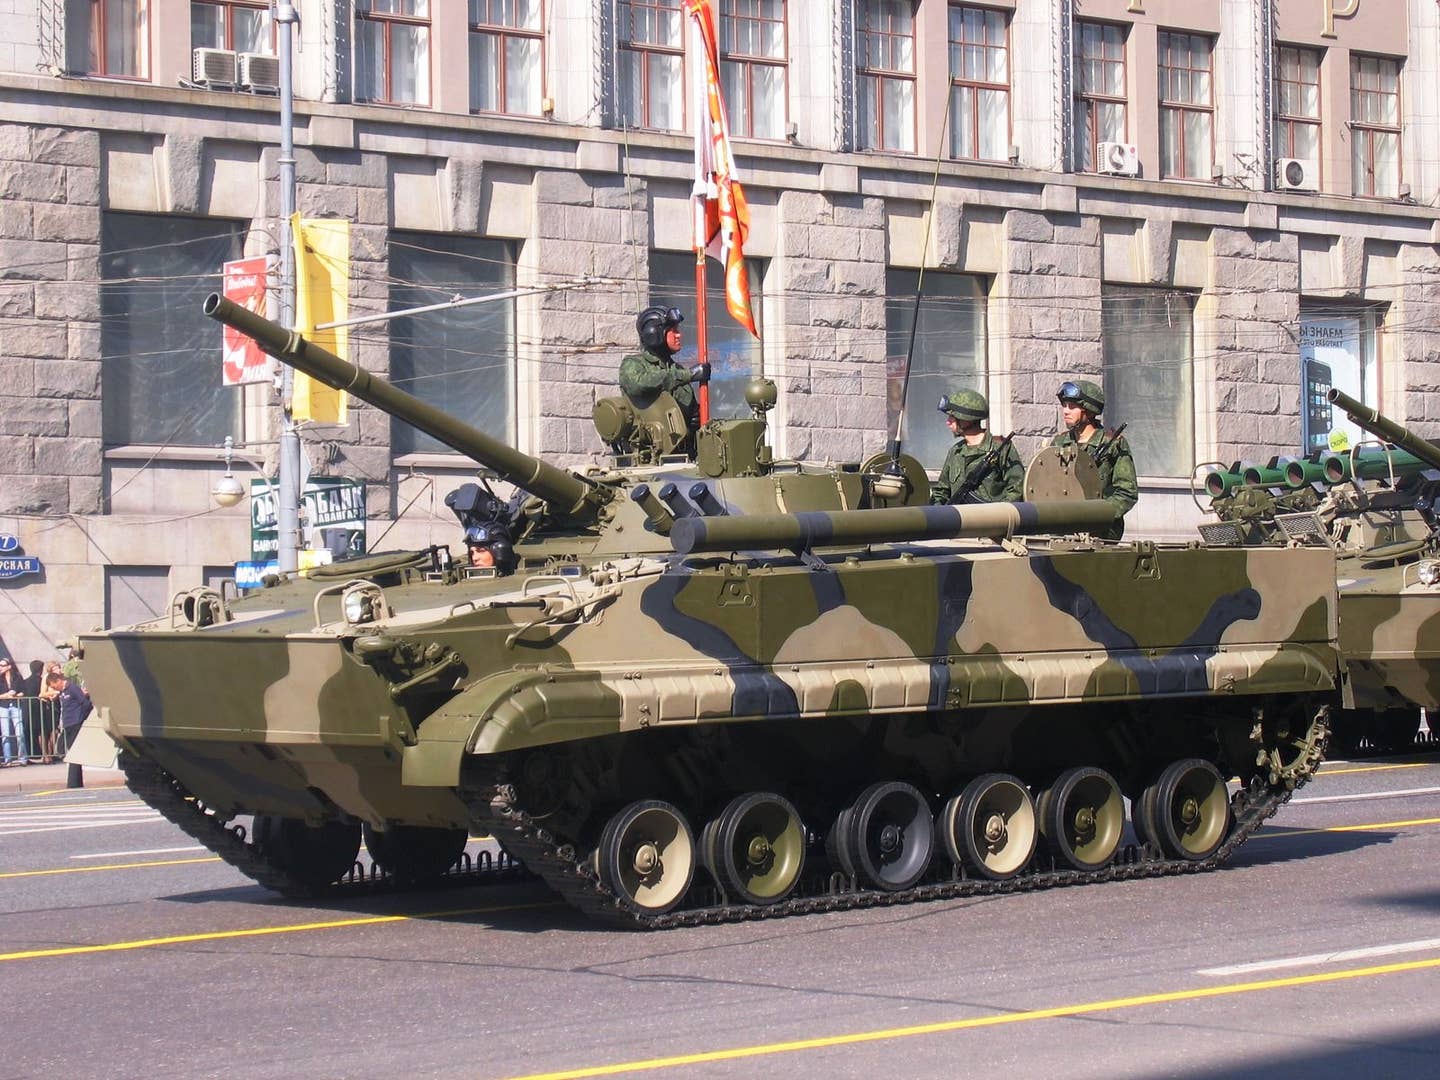 A BMP-3 in Moscow, prior to a 2008 parade. (Image from Wikimedia Commons)